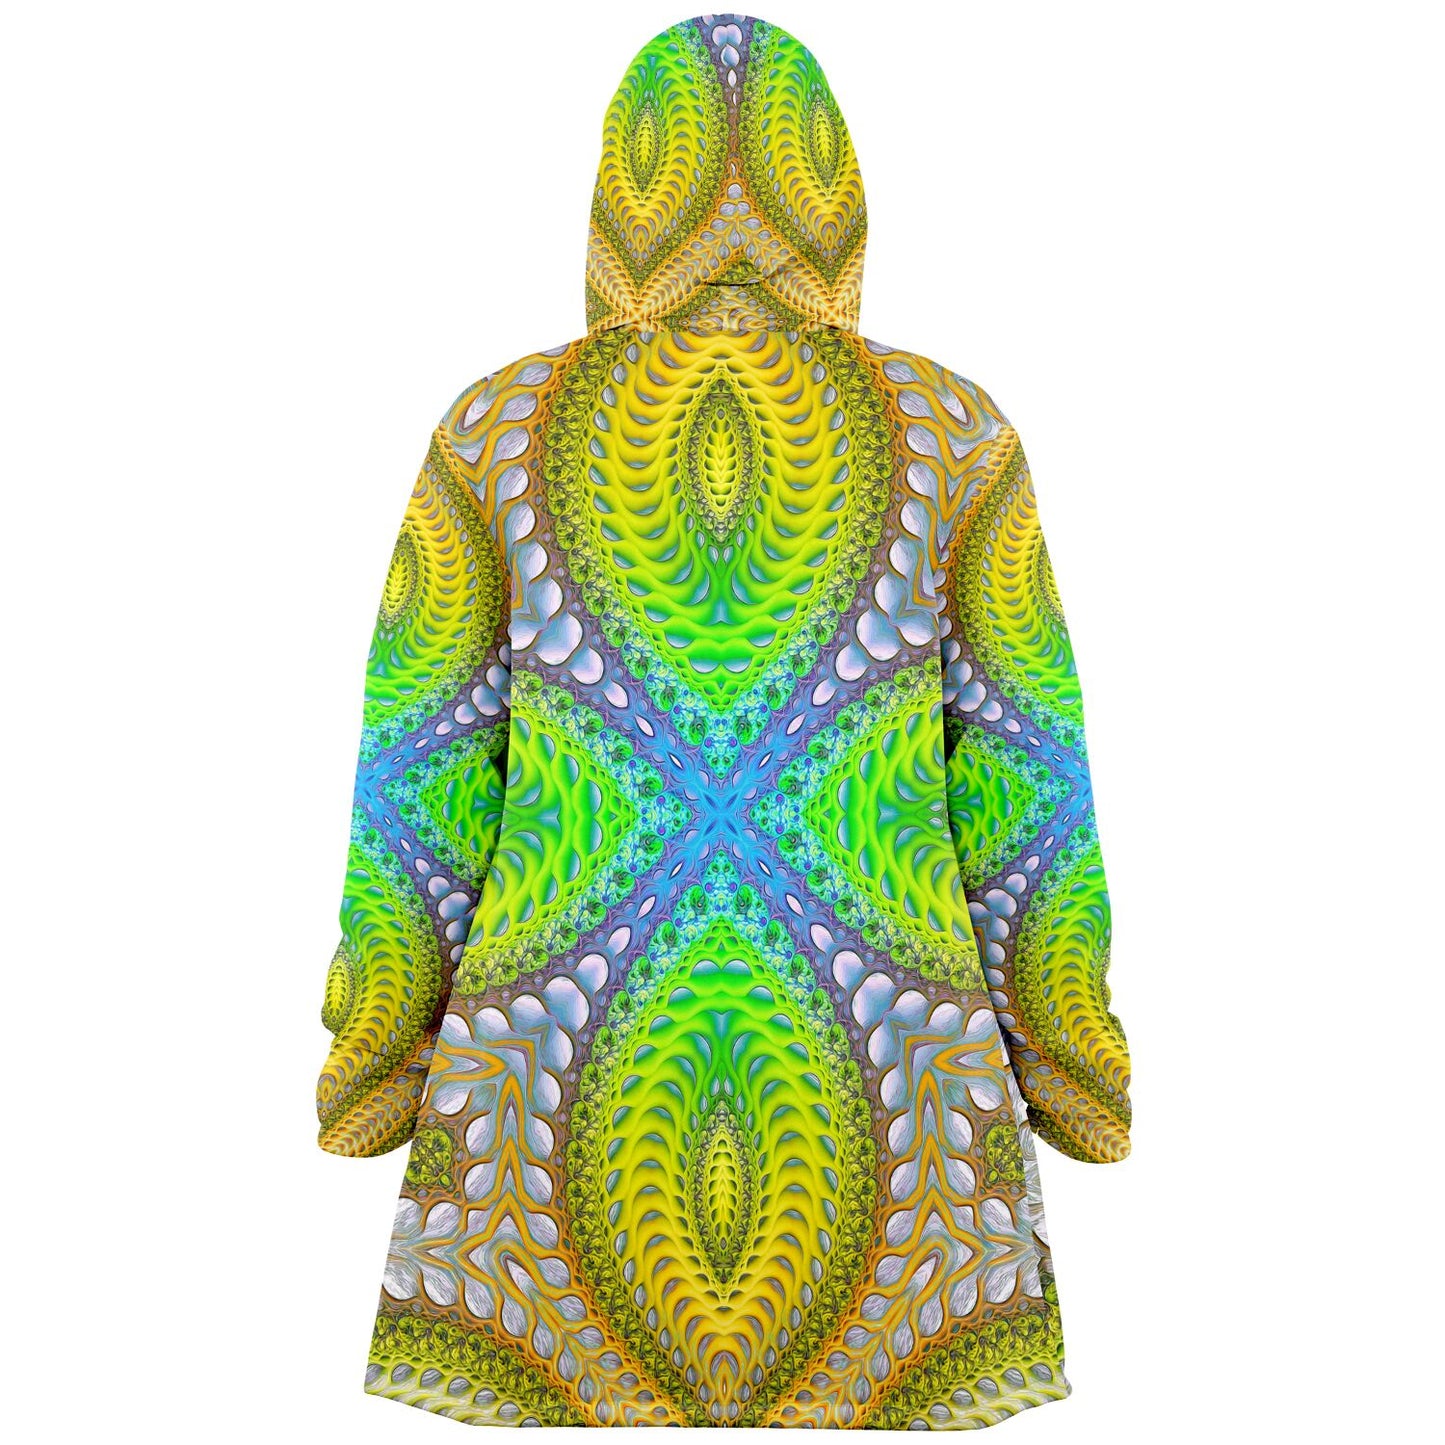 "Activation Initiated V2" HOODED CLOAK